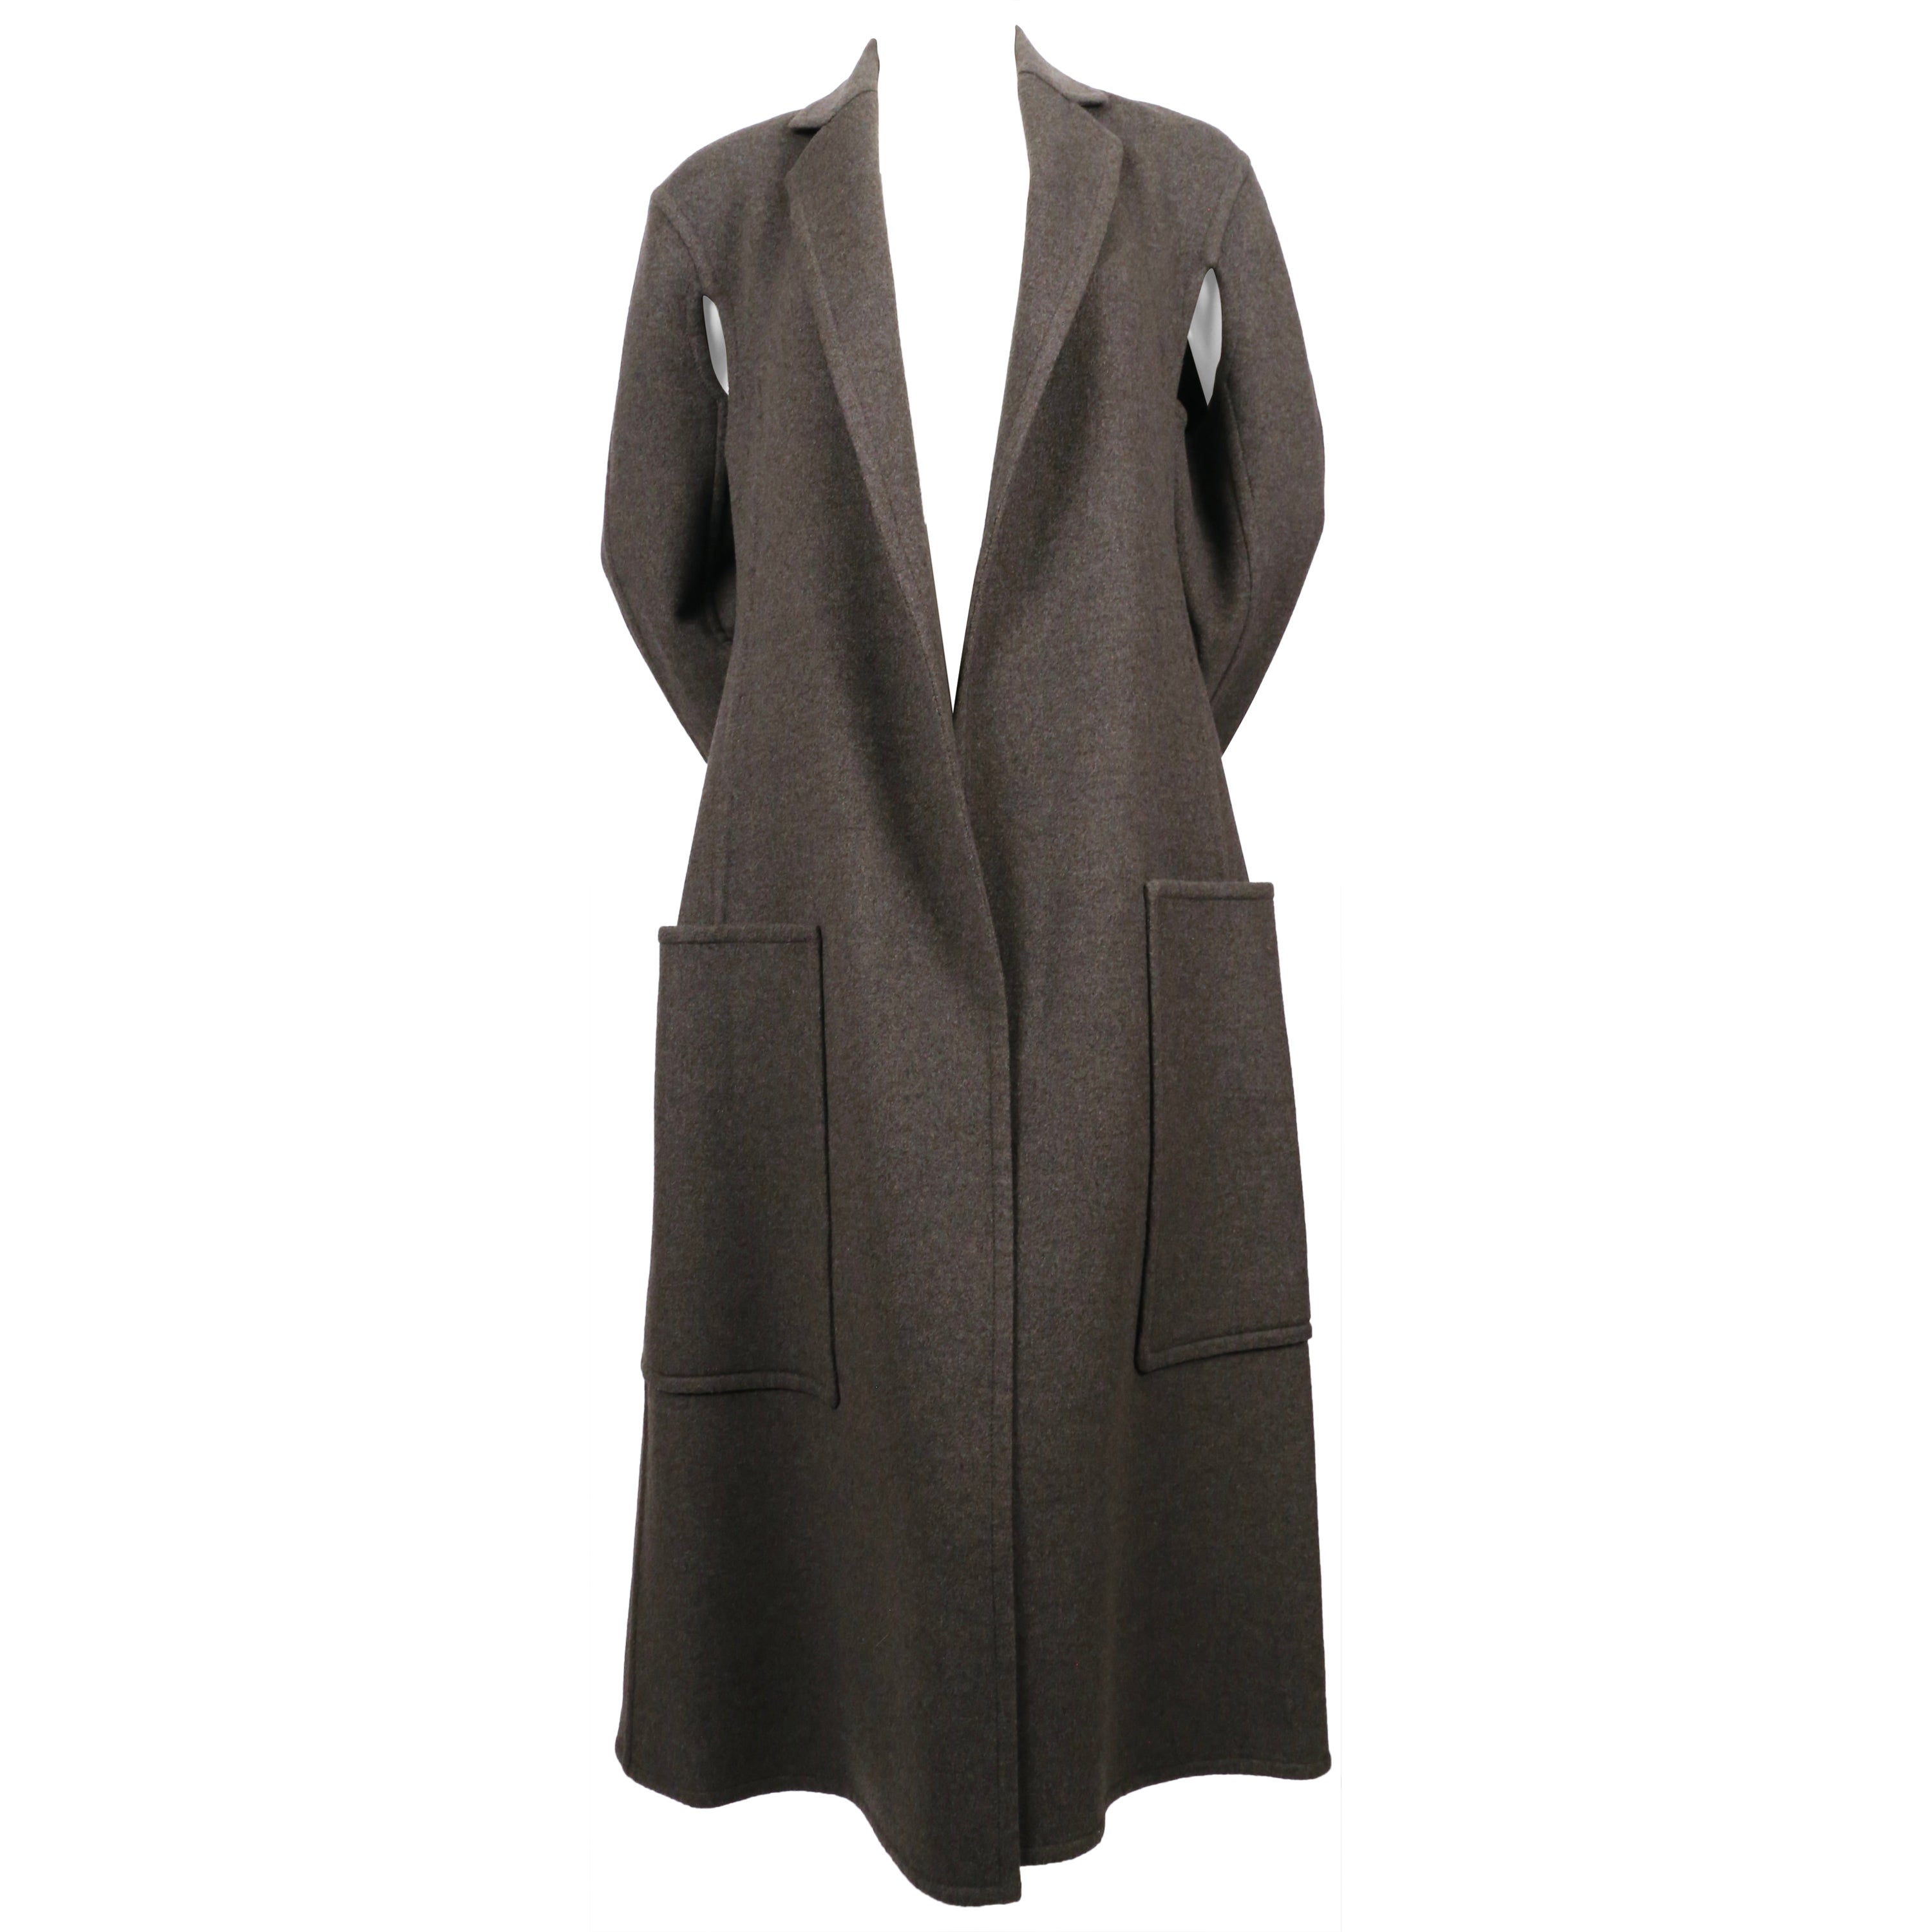 Celine by Phoebe Philo heathered grey cashmere coat with cutouts & wrap pockets For Sale